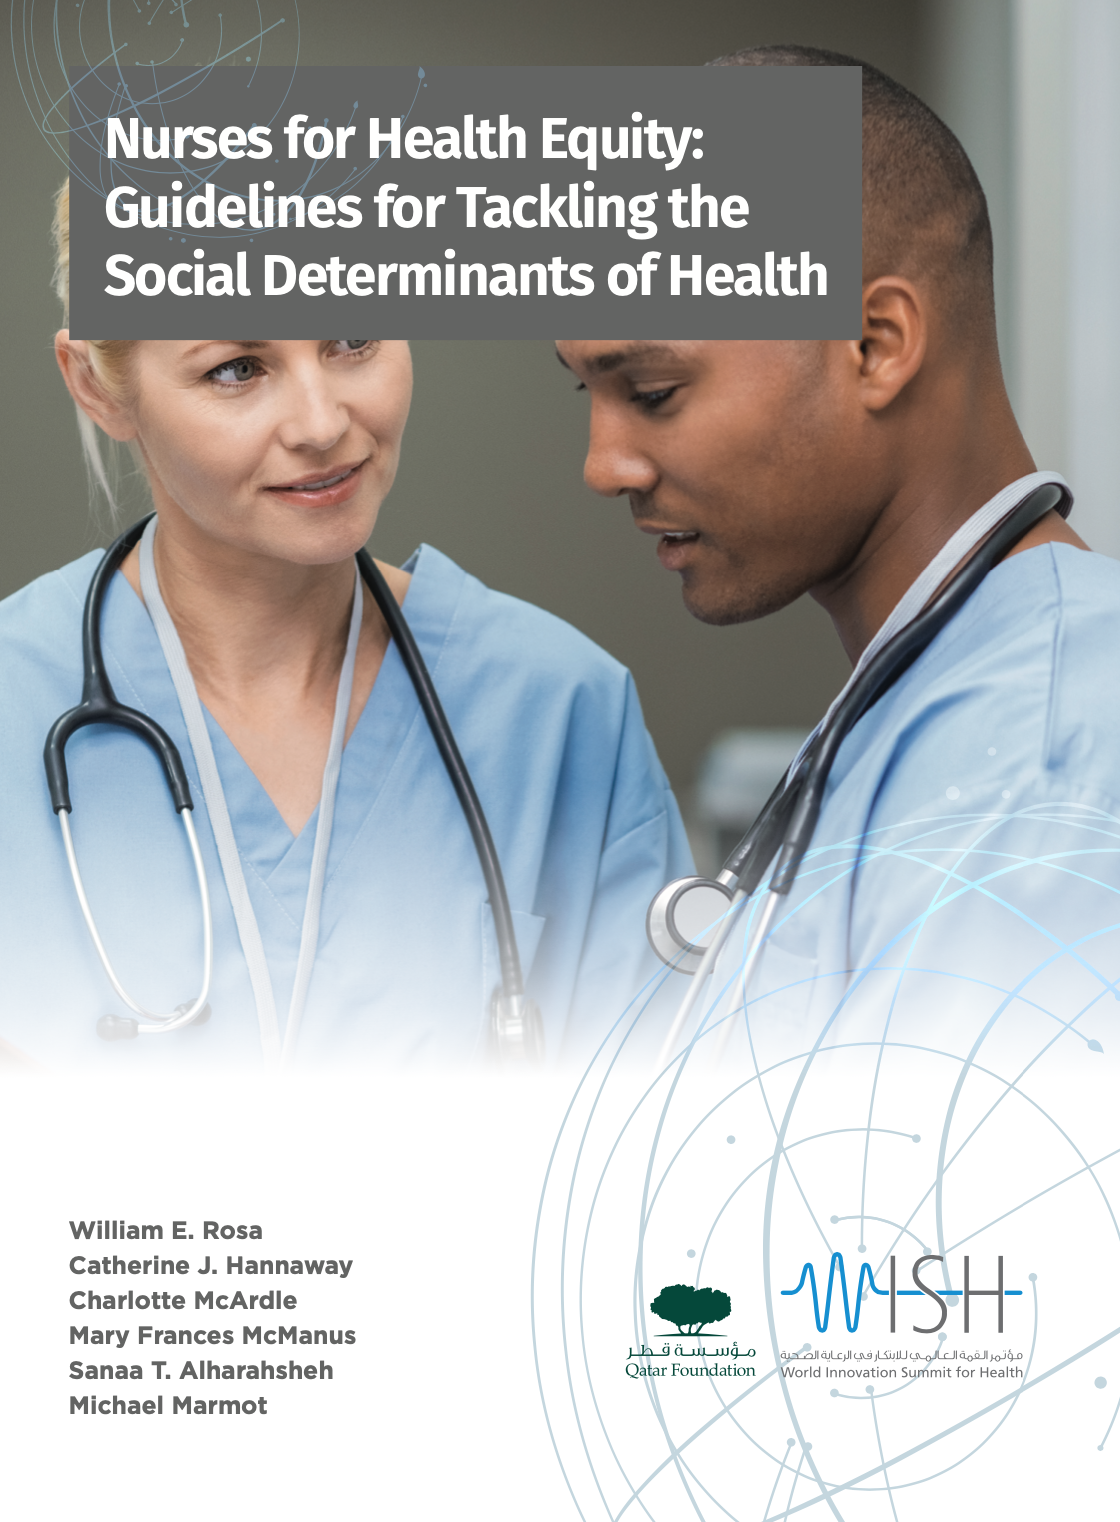 Nurses for Health Equity: Guidelines for Tackling the Social Determinants of Health